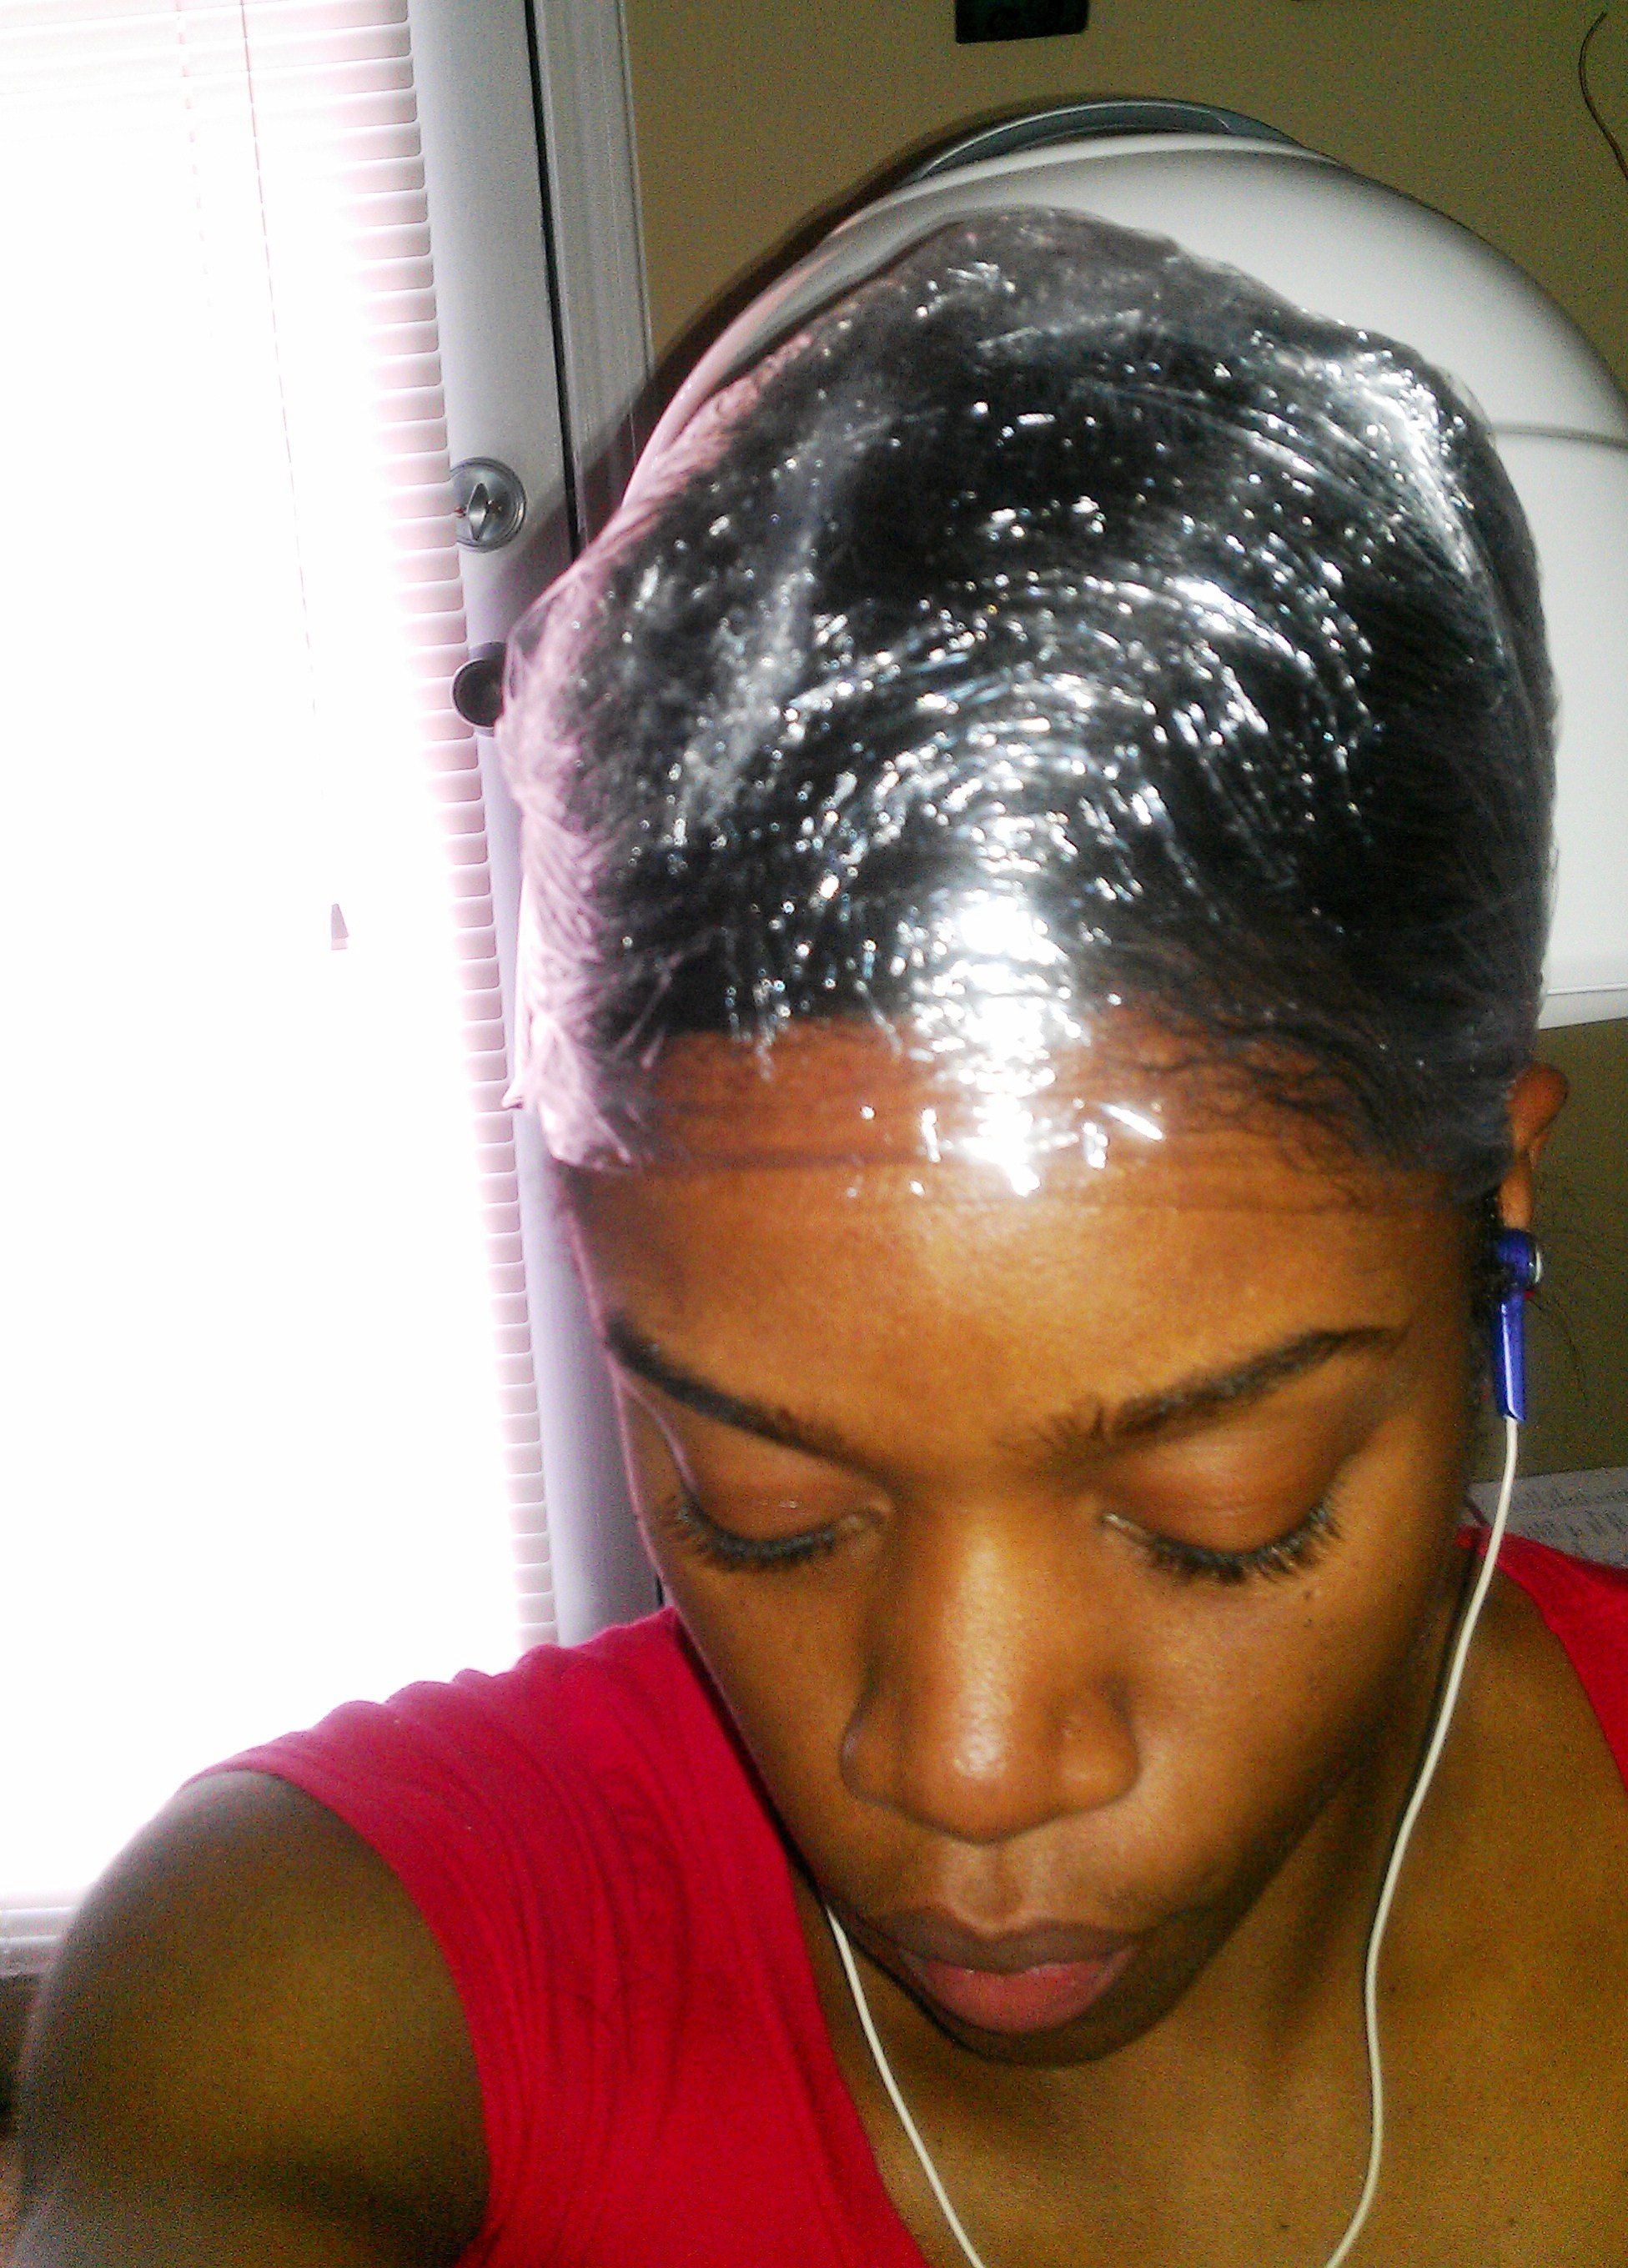 ... wrap then apply good old saran wrap around my head covering my hair